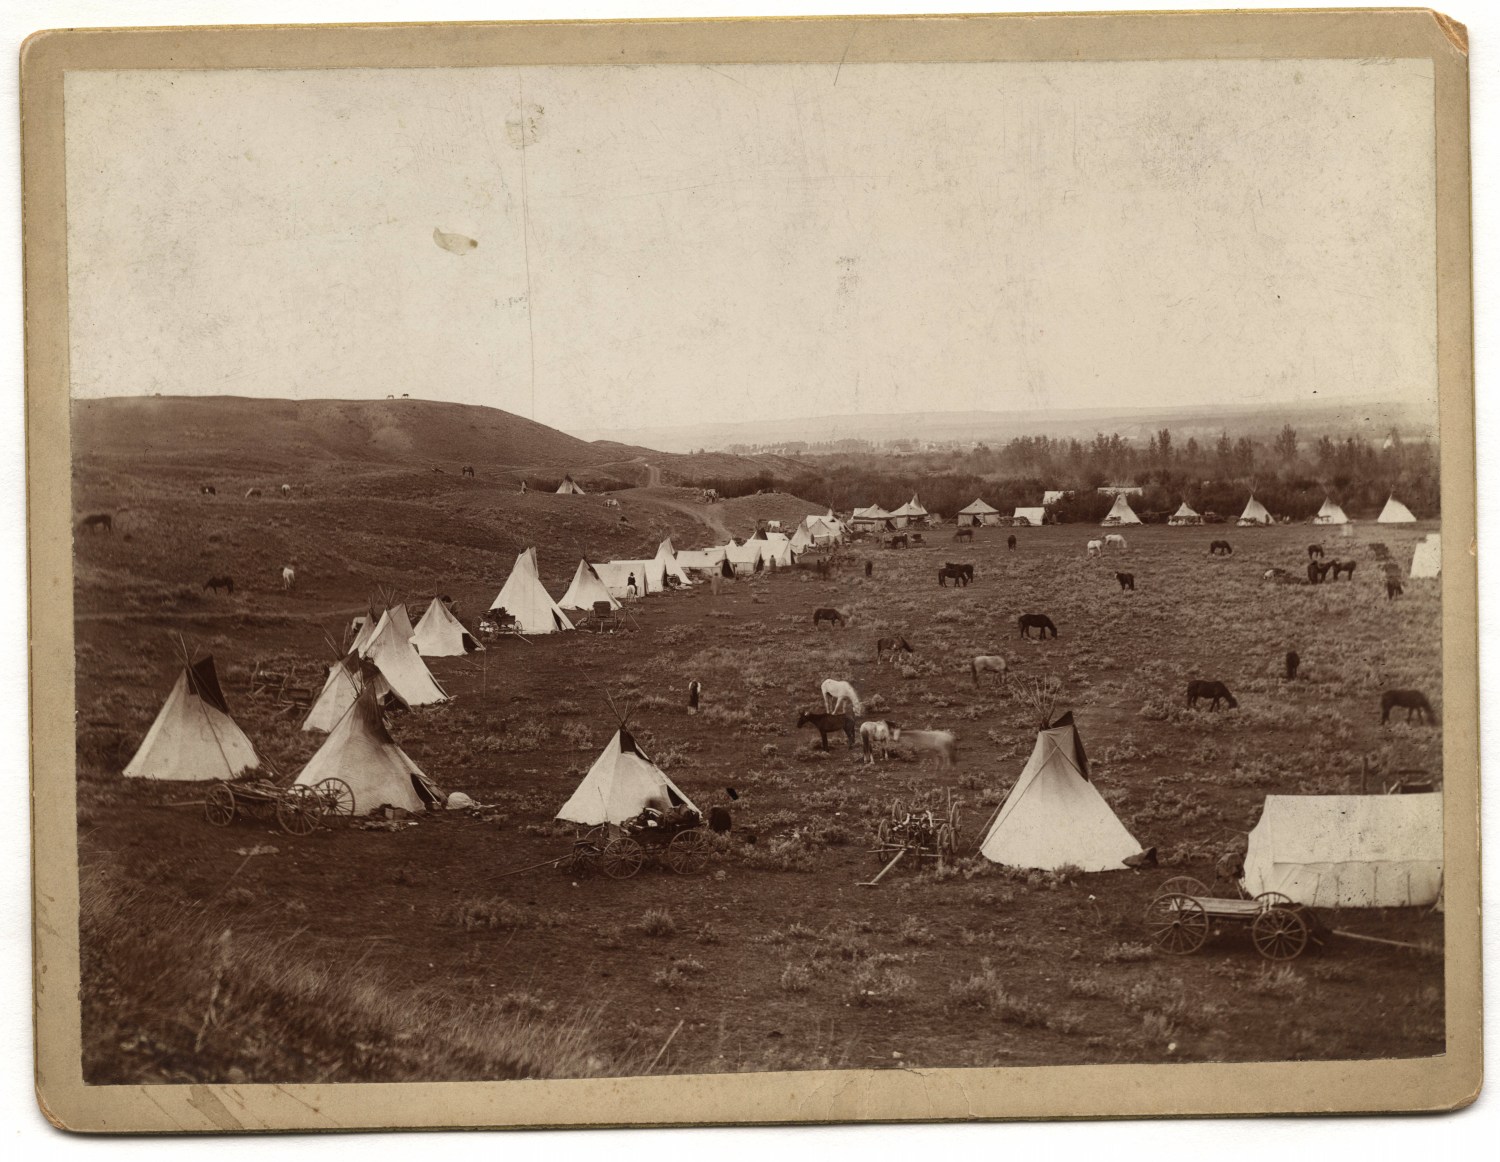 Photo of an unidentified Indian encampment, ca. 1927